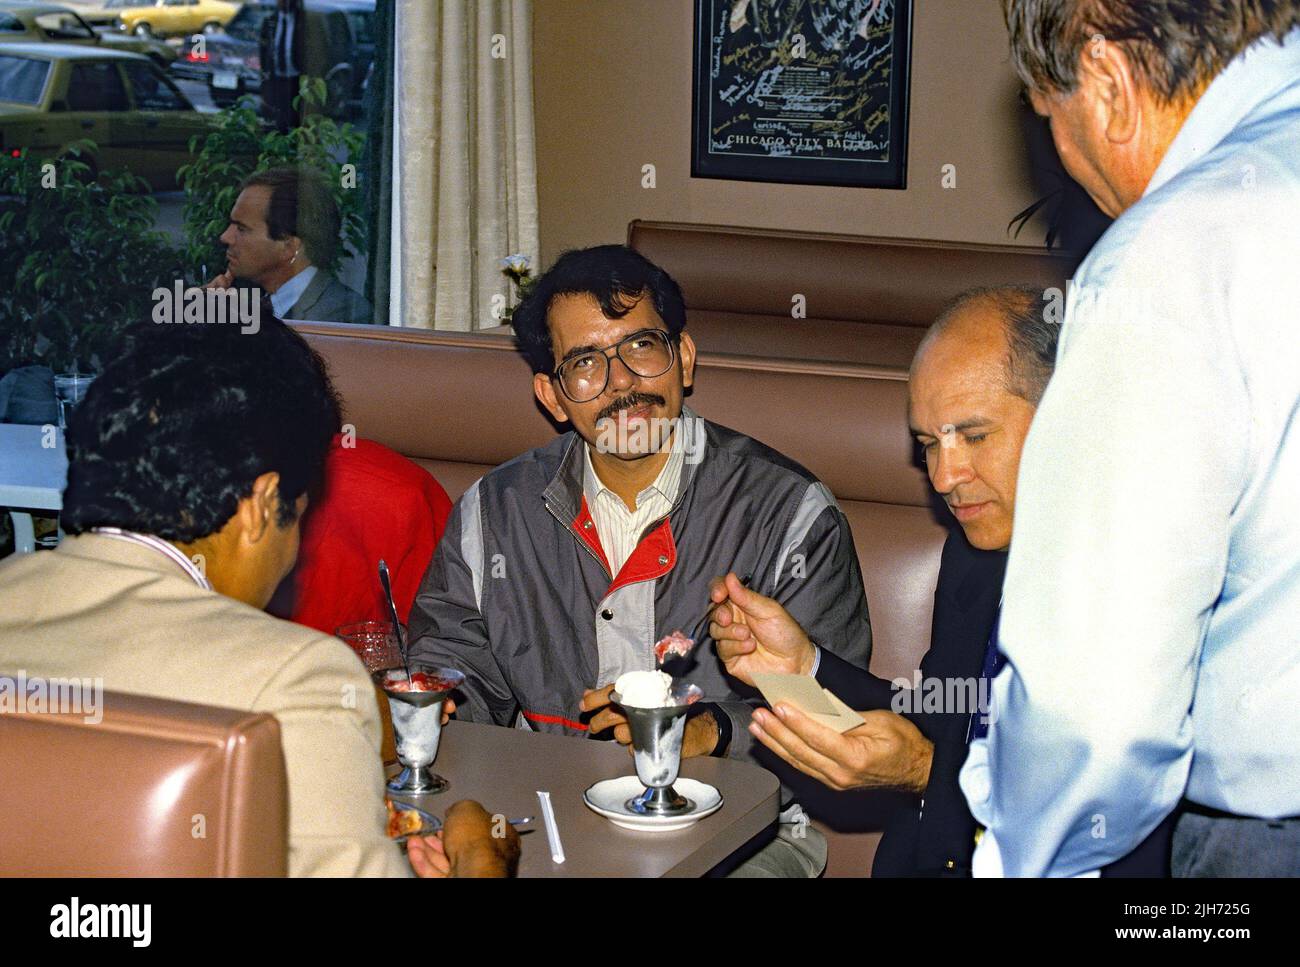 CHICAGO, ILLINOIS - AUGUST 2, 1986 President of Nicaragua Daniel Ortega sits with his family enjoying some of Chicago's famous hot dogs, followed by ice cream sundaes at diner on Michigan Avenue after meeting with the Rev. Jesse Jackson at PUSH headquarters. Credit: Mark Reinstein / MediaPunch Stock Photo